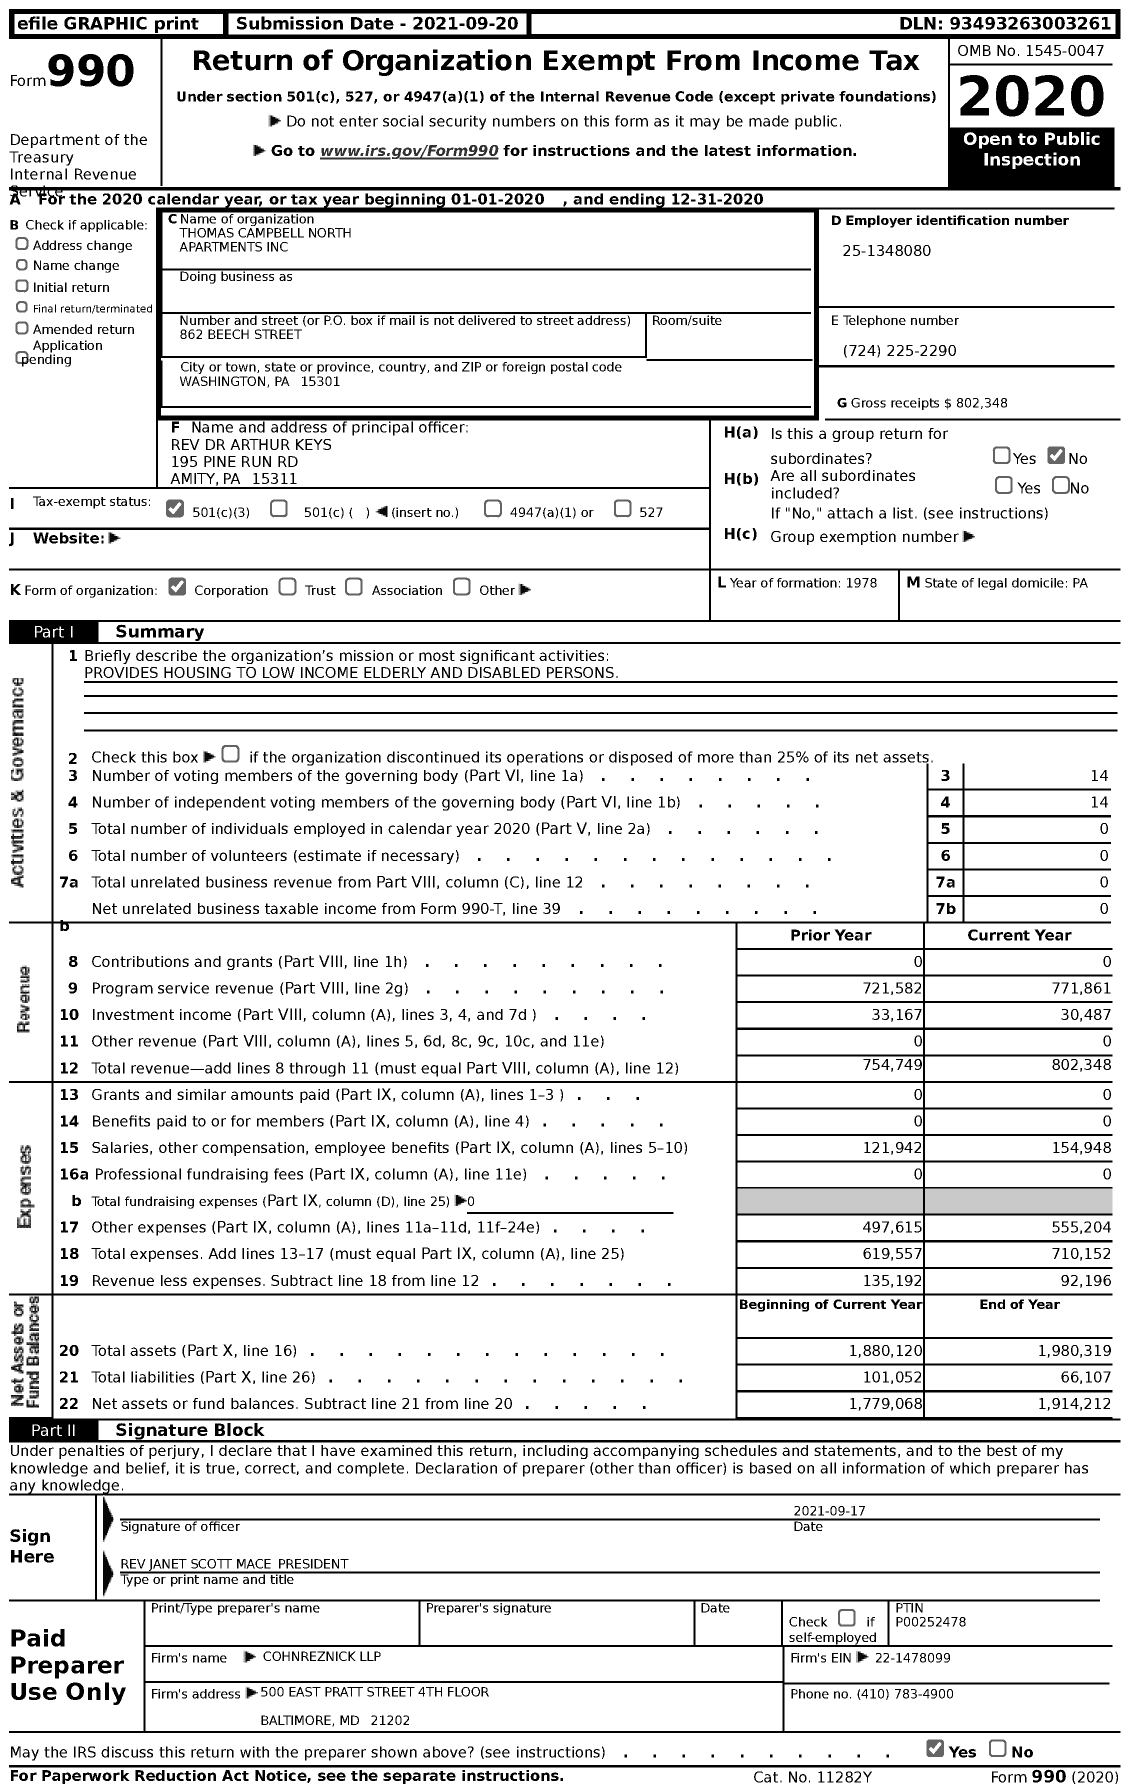 Image of first page of 2020 Form 990 for Thomas Campbell North Apartments